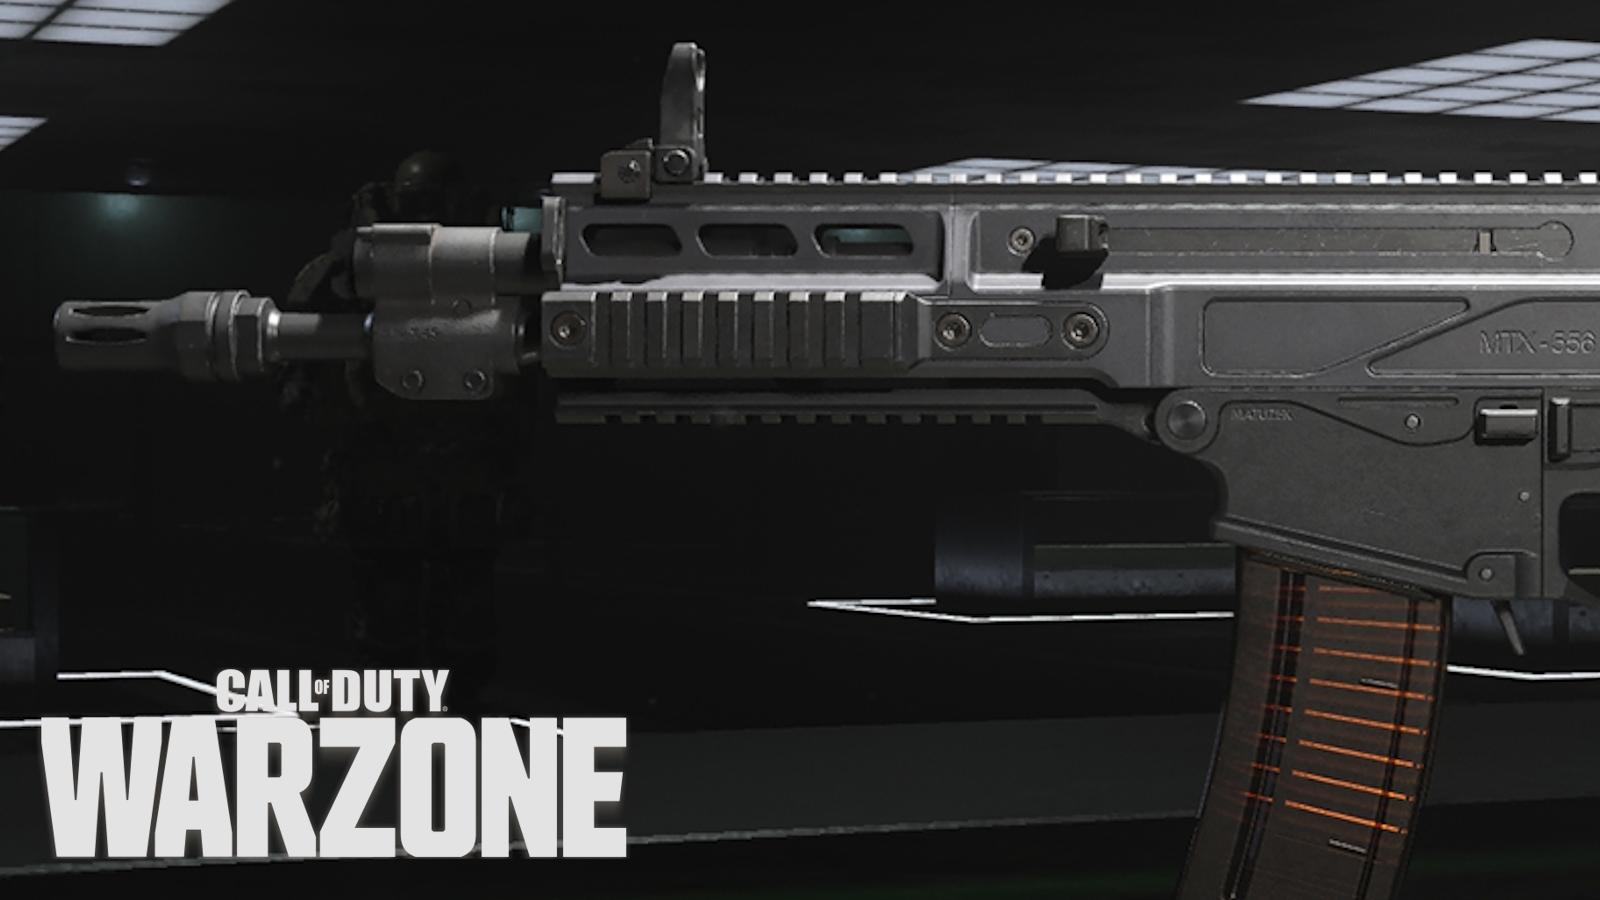 The MTZ-556 assault rifle in Warzone.